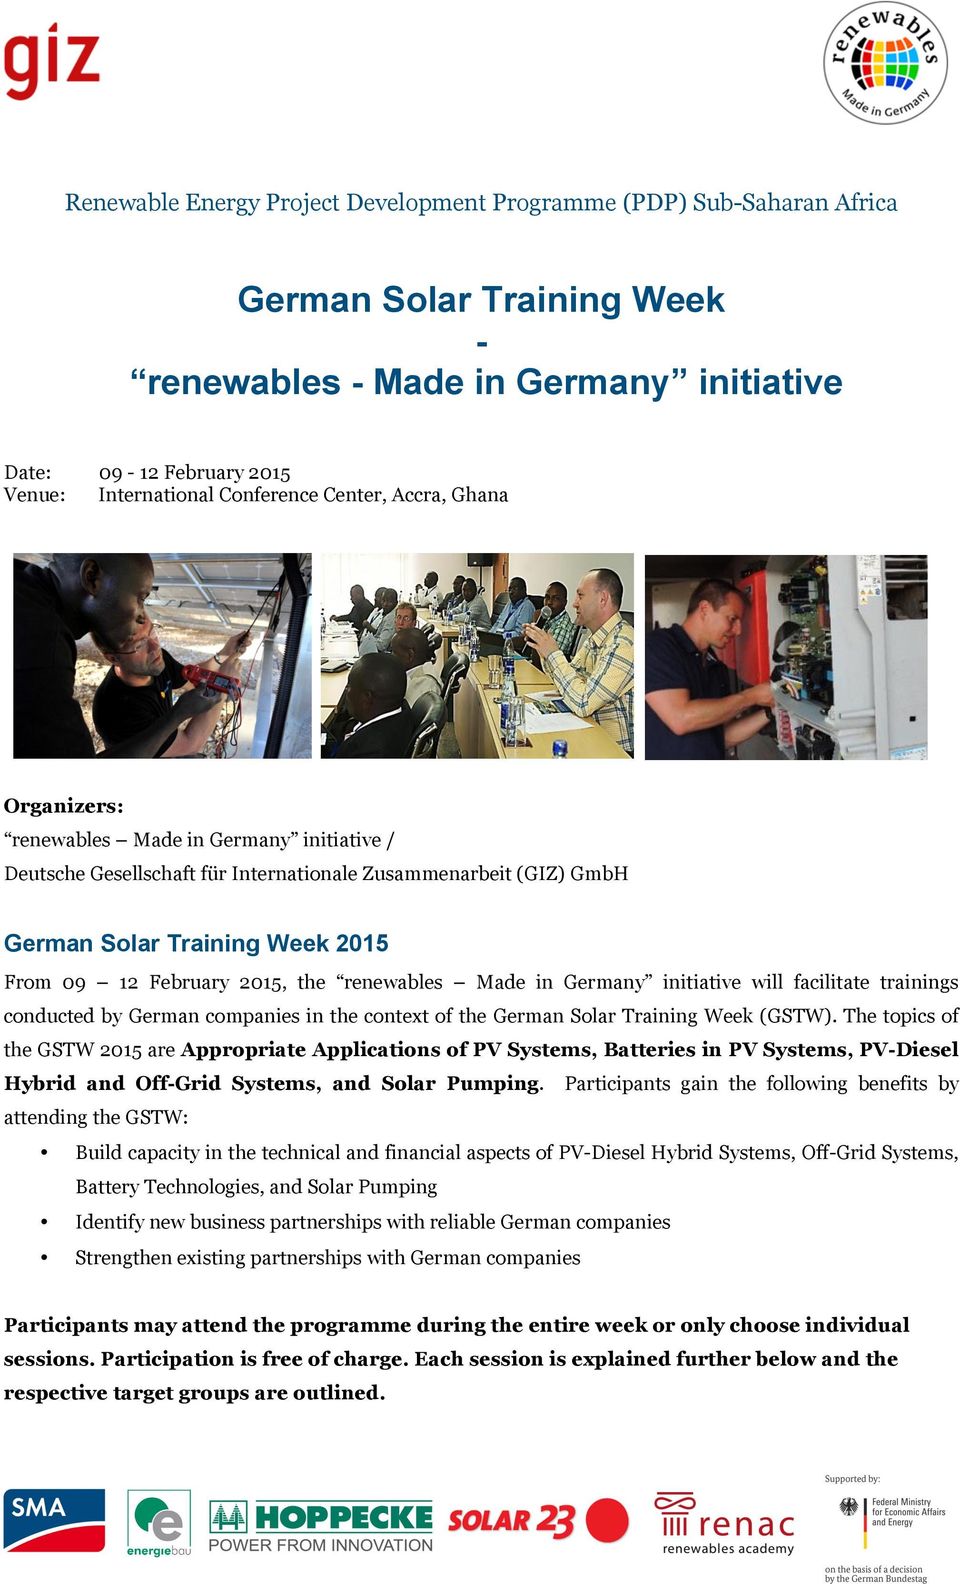 facilitate trainings conducted by German companies in the context of the German Solar Training Week (GSTW).